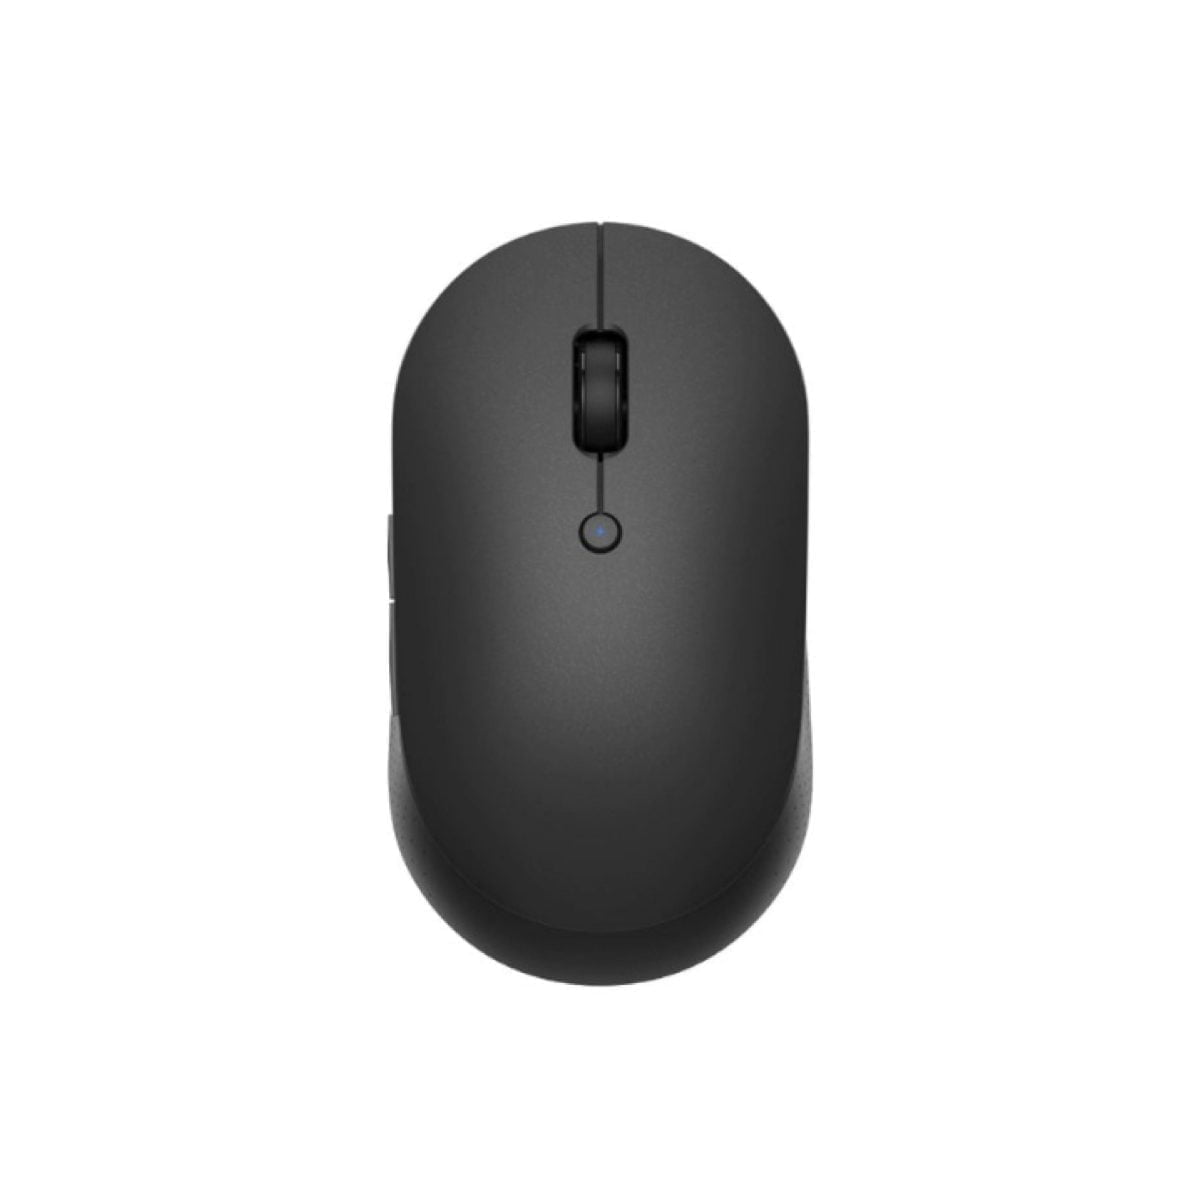 Eqwas 03 Scaled Xiaomi Bluetooth + 2.4Ghz Dual-Mode Connection, Which Can Be Switched Between Two Computers Freely, Silent Button Design, Don'T Worry About Disturbing Others Xiaomi Mi Dual Mode Wireless Mouse Silent Edition Black (1300Dpi)